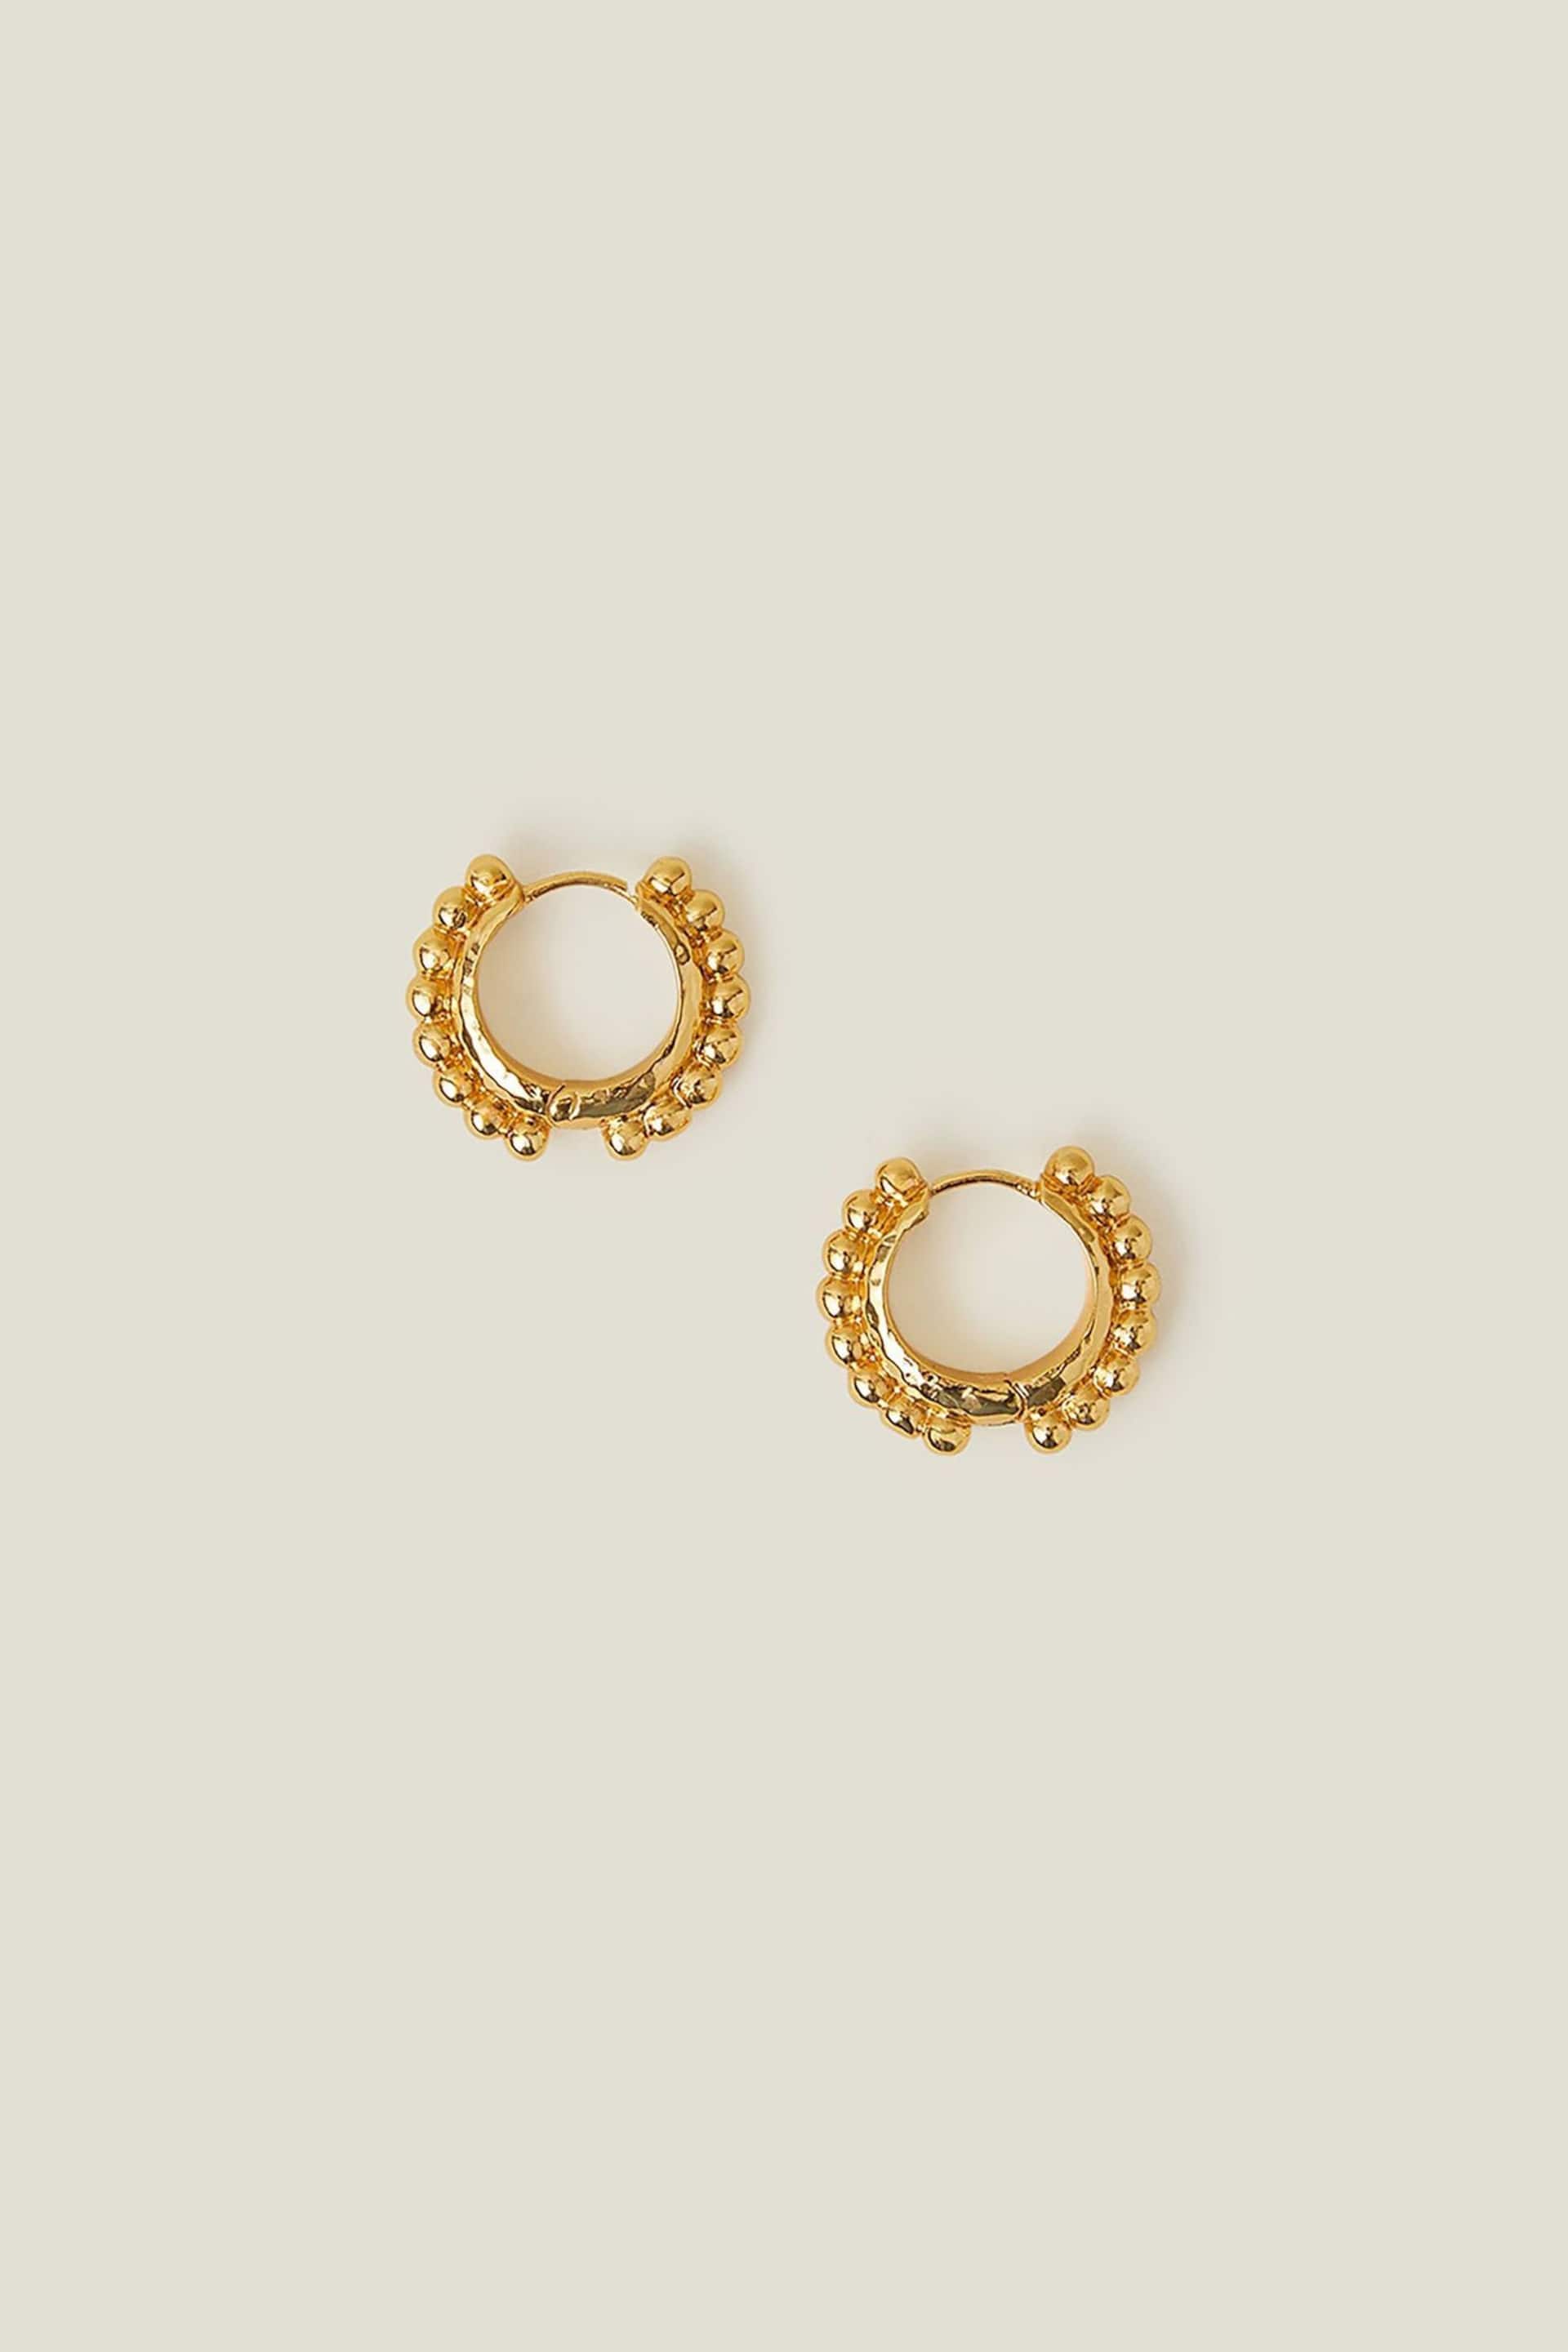 Accessorize 14ct Gold Plated Bobble Round Hoop Earrings - Image 1 of 3